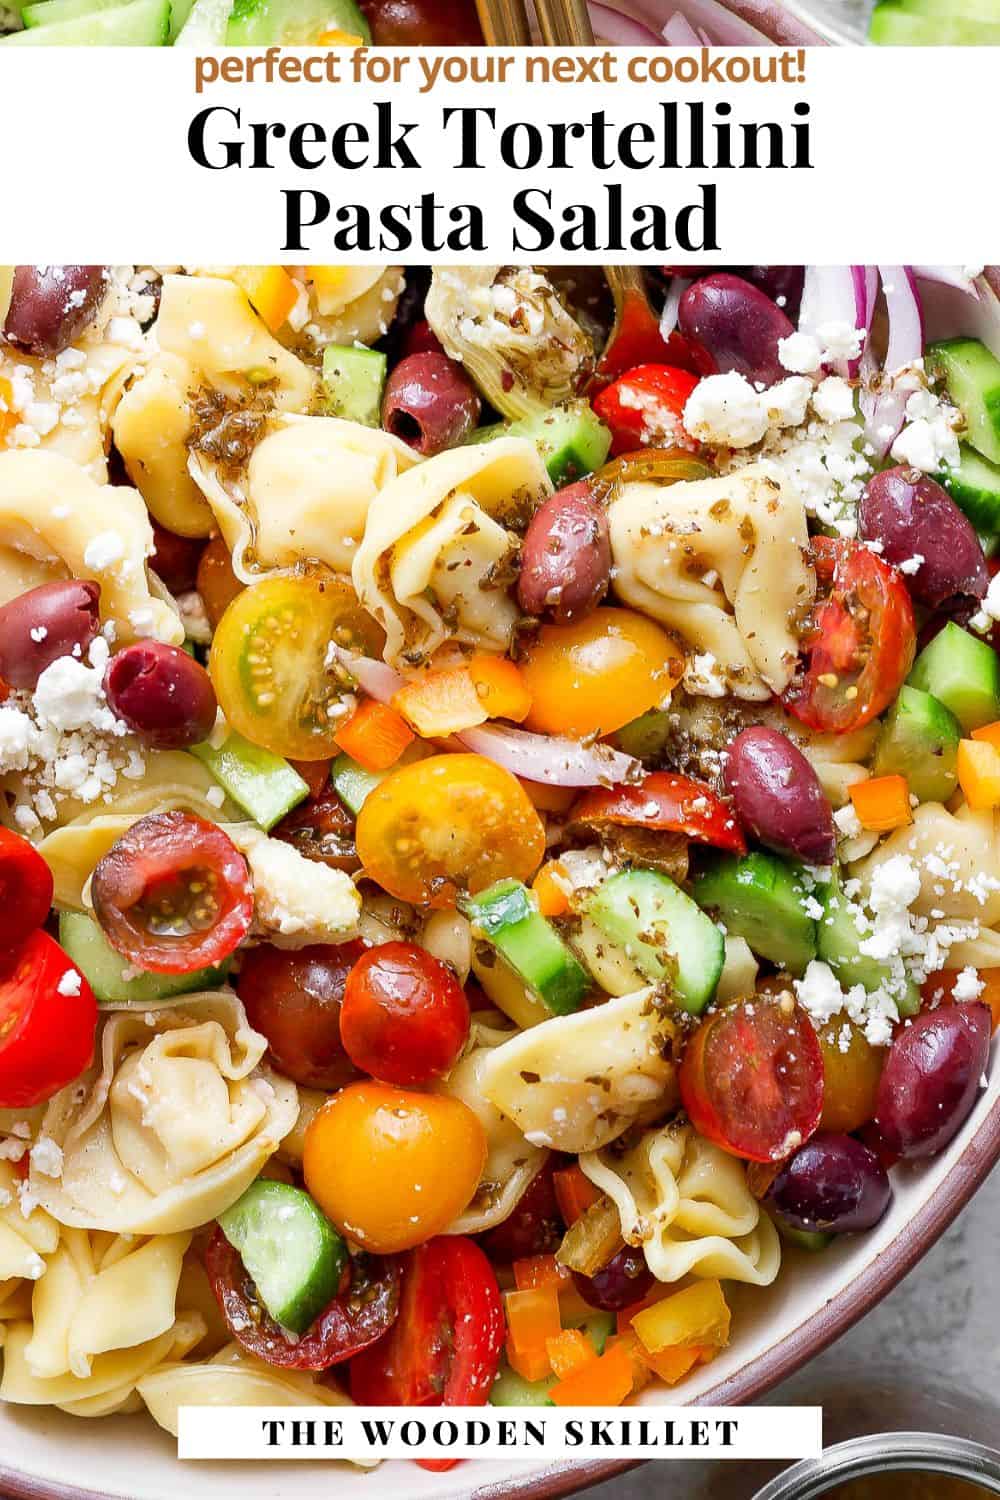 Pinterest image showing tortellini salad with the title, "greek tortellini pasta salad, perfect for your next cookout!"